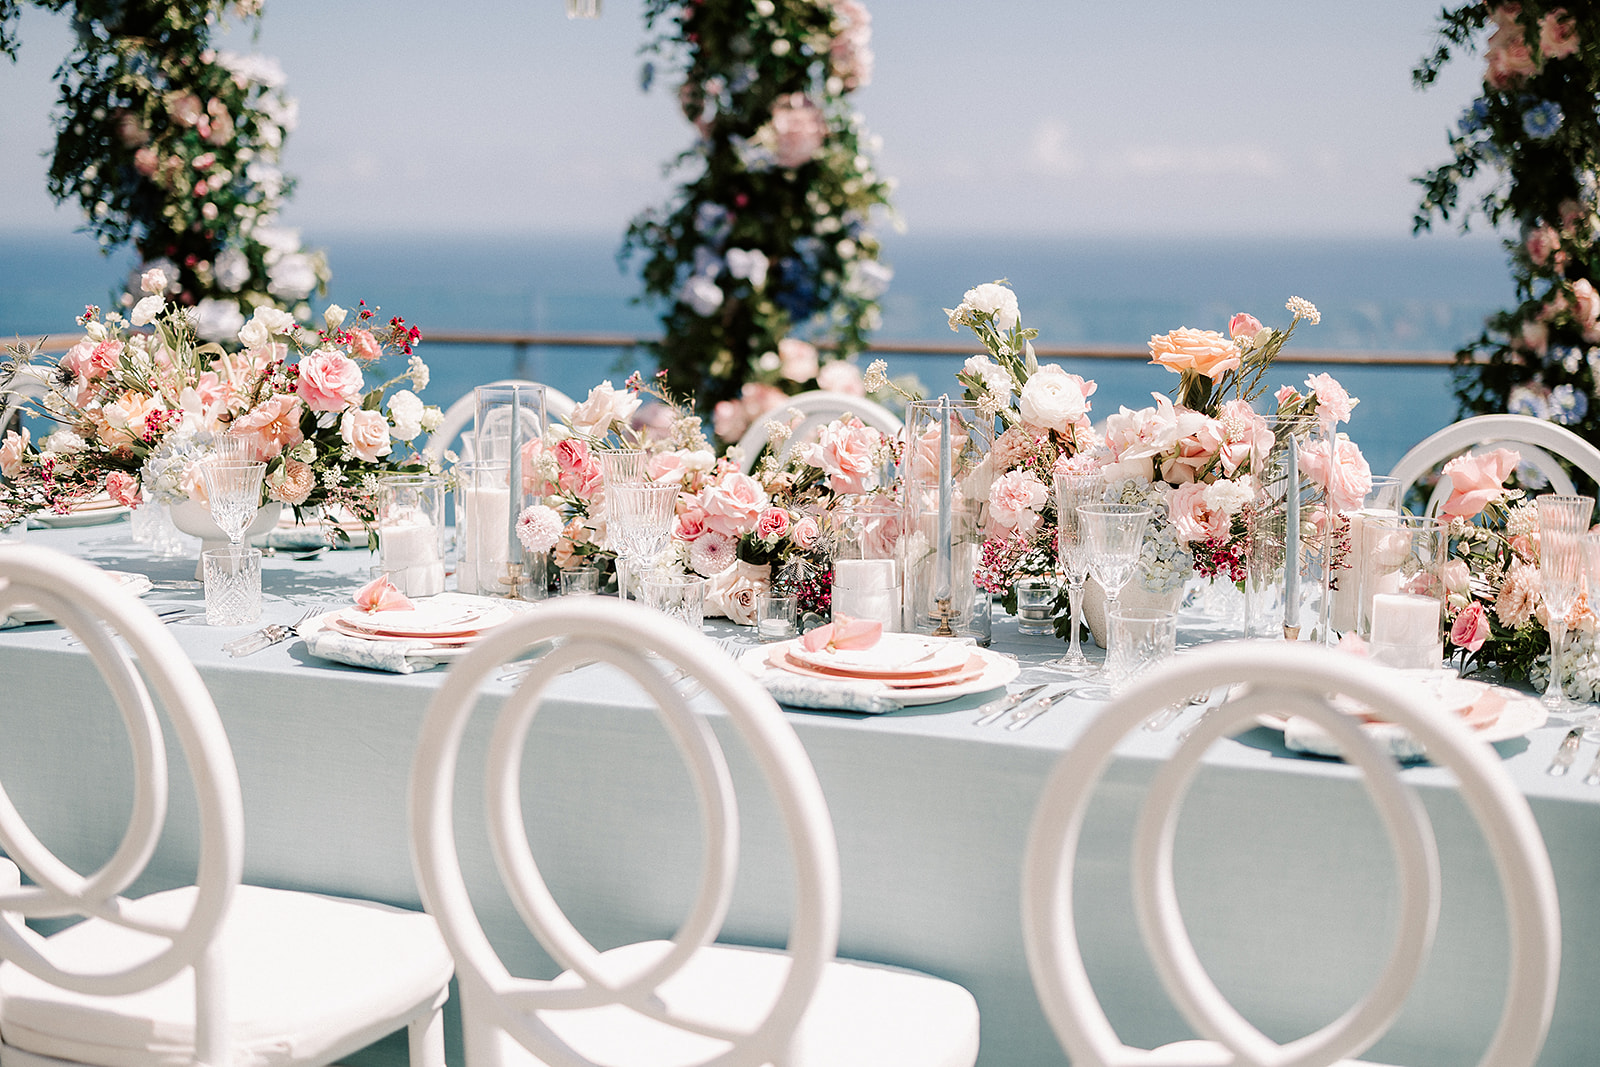 outdoor wedding table set up with flowers, by the cliffside in Uluwatu